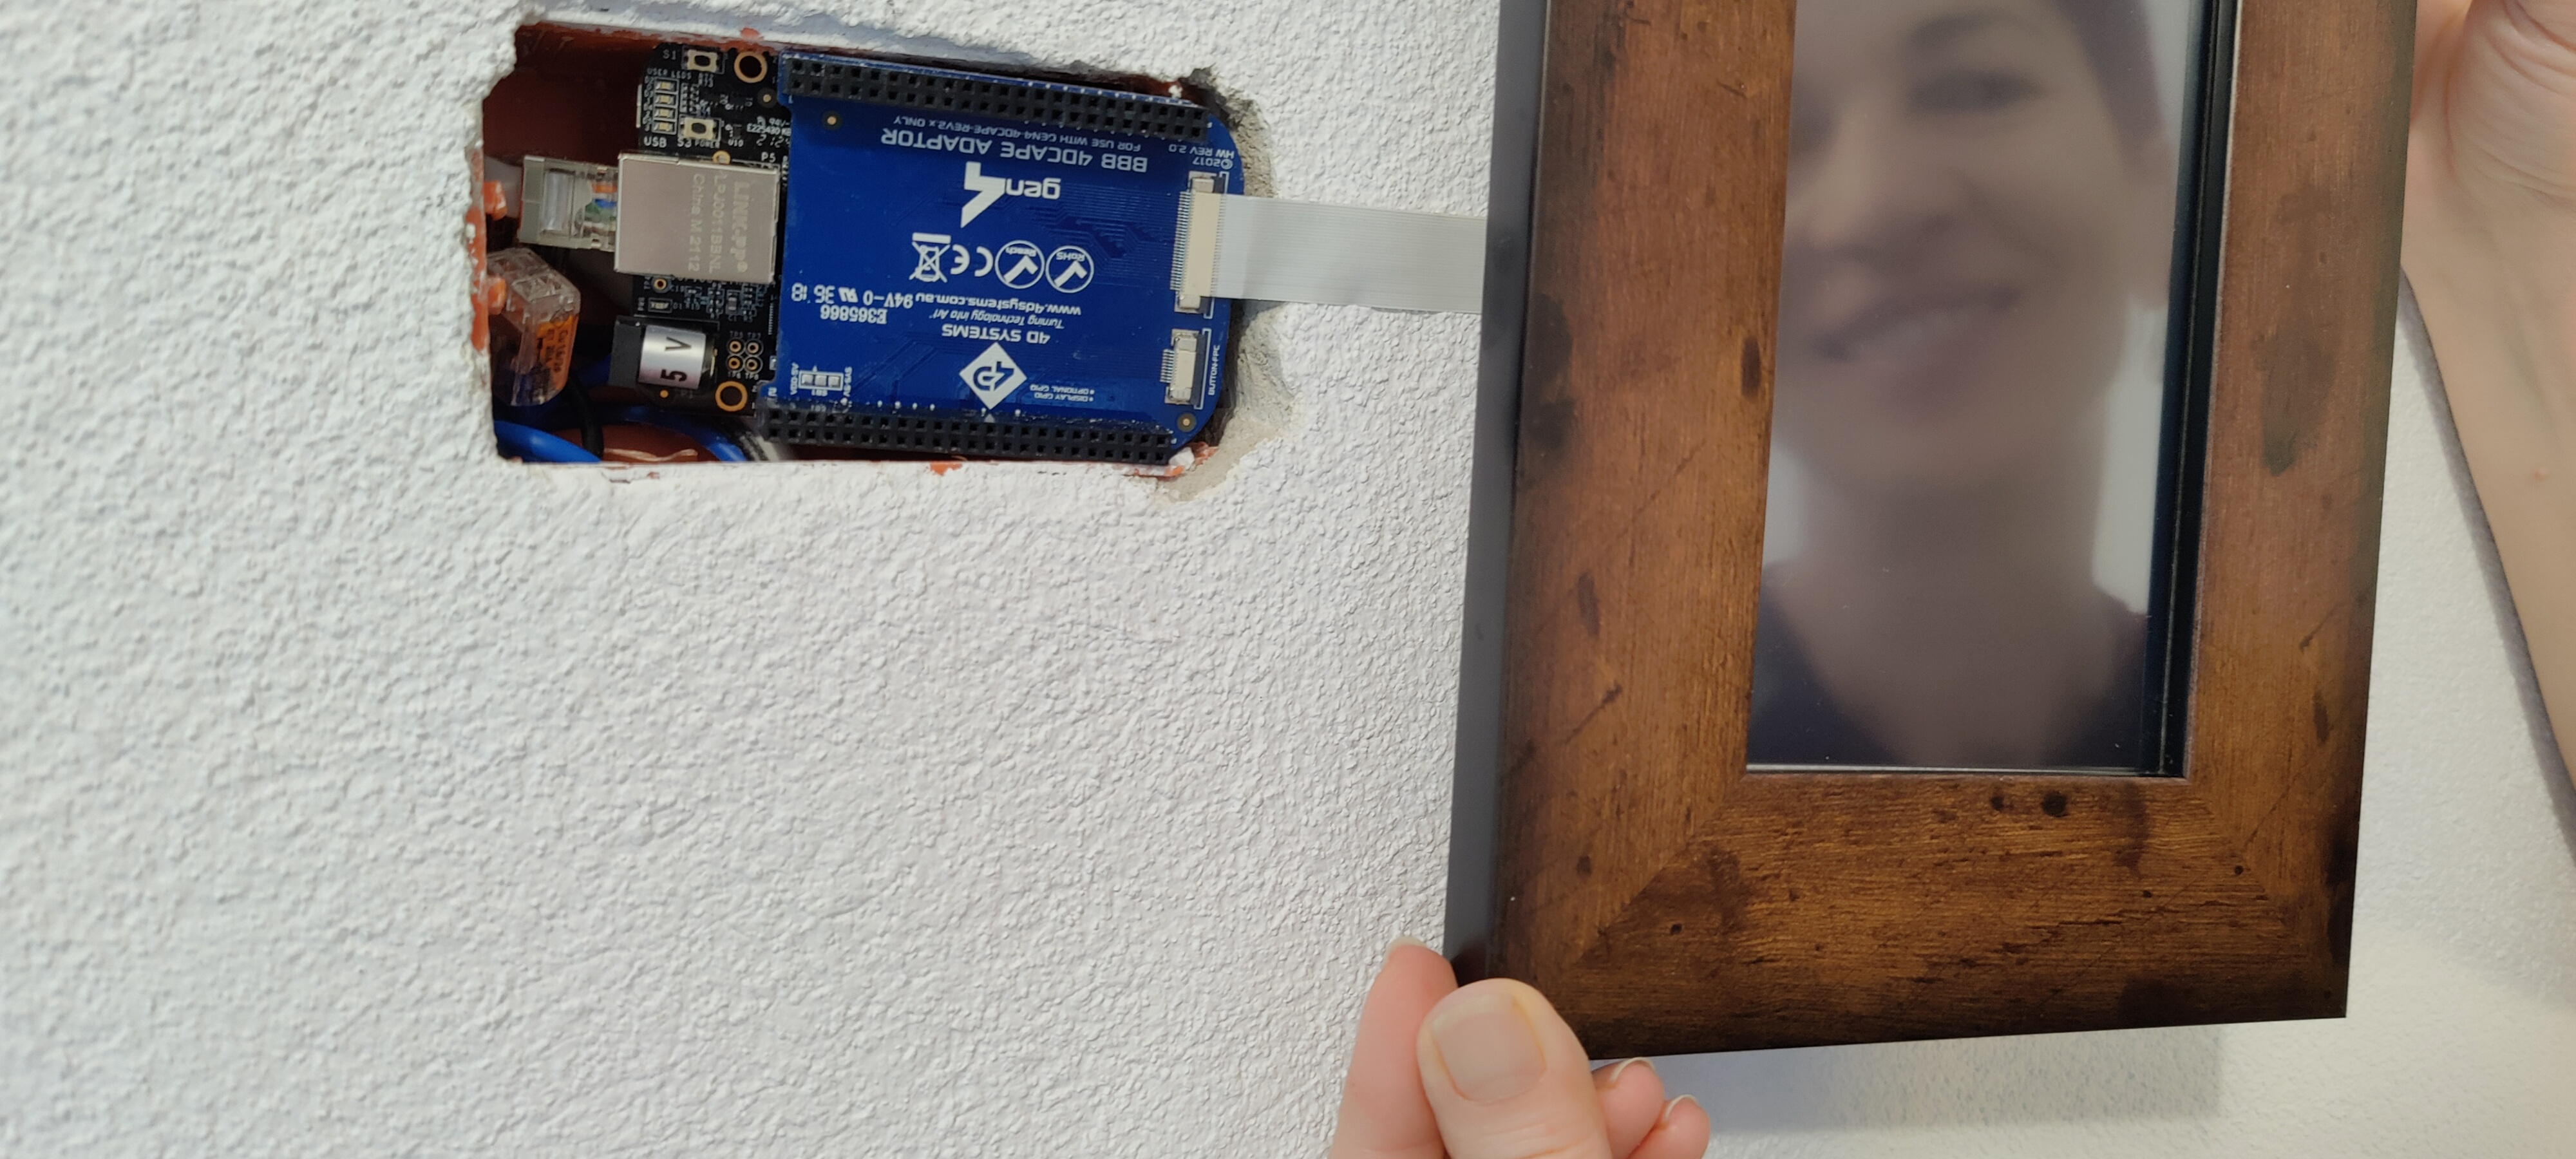 The BeagleBoard with the display ribbon